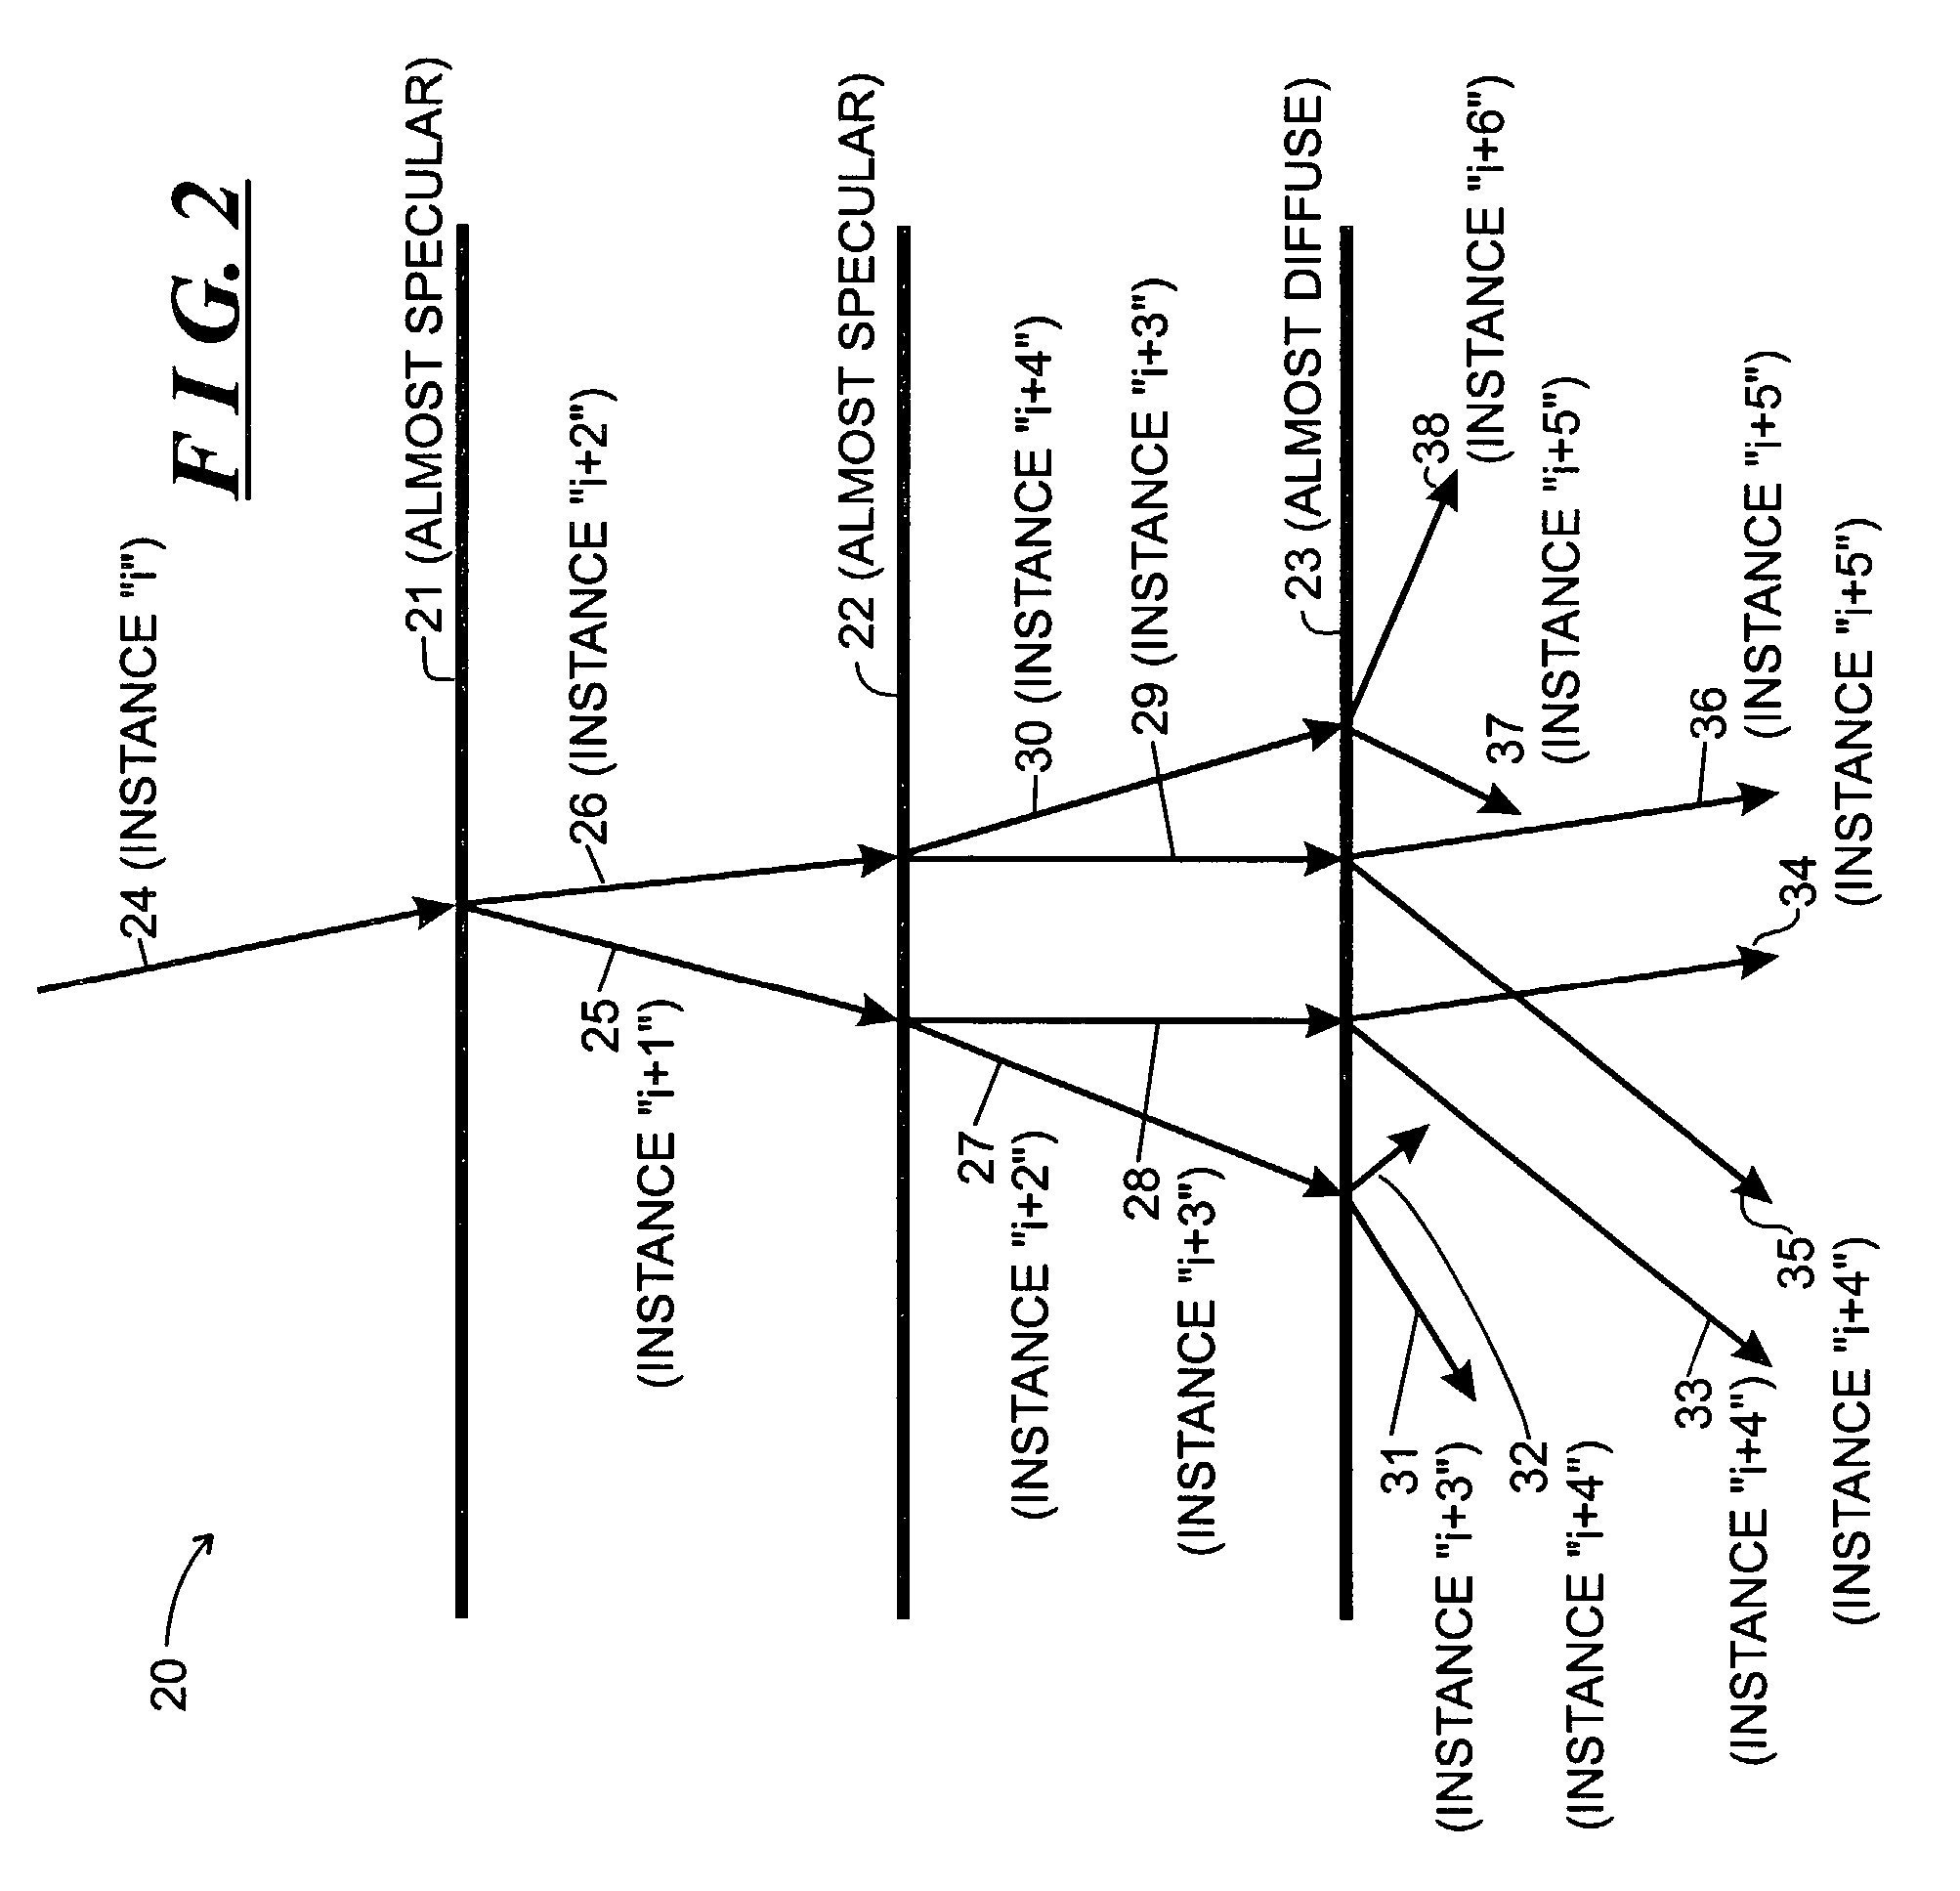 System and method for rendering images using a strictly-deterministic methodology including recursive rotations for generating sample points